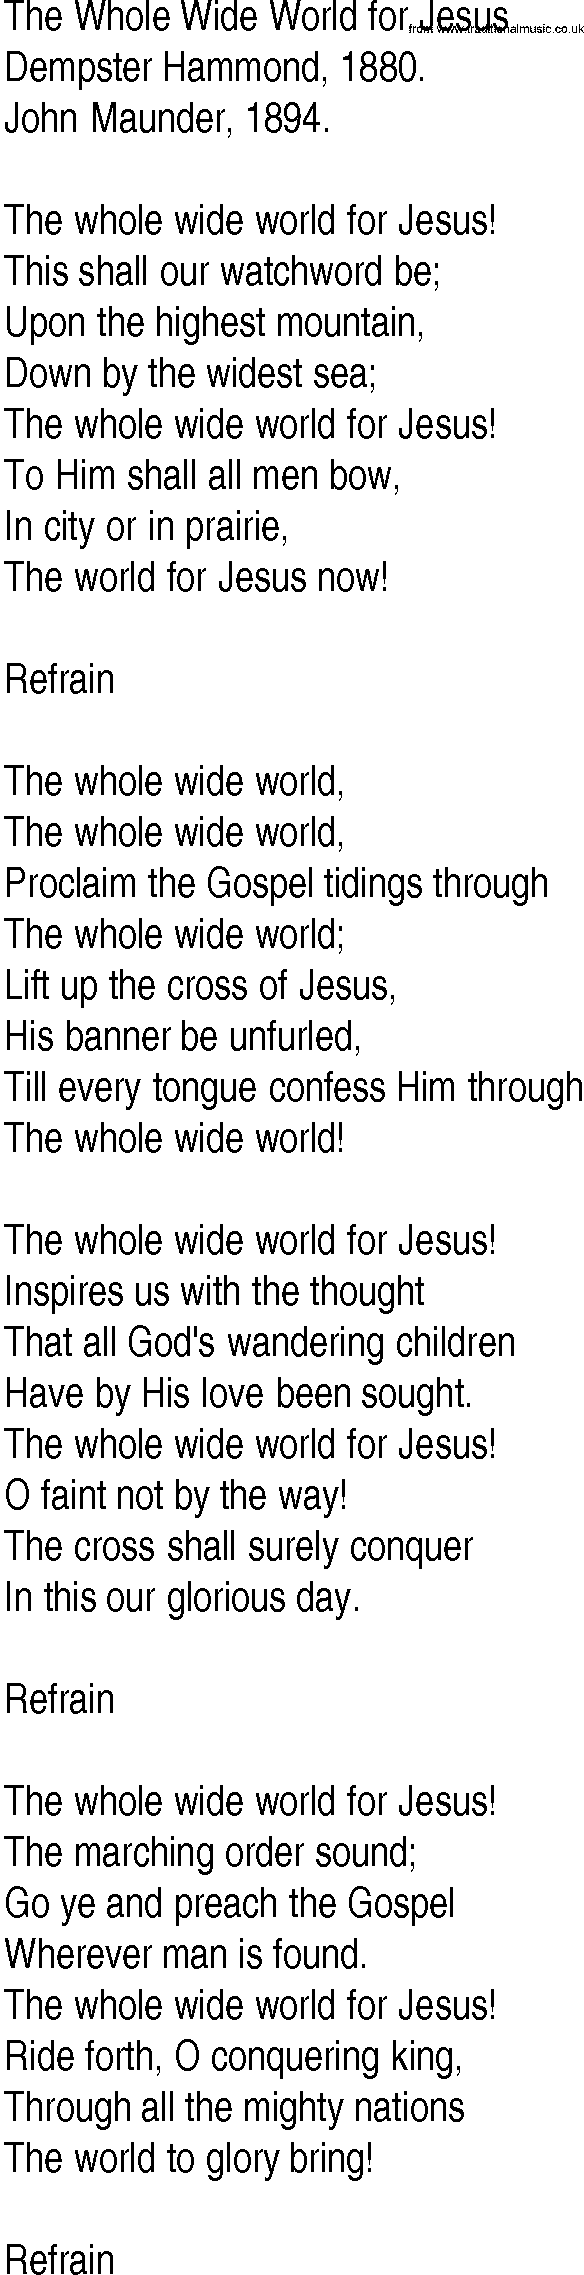 Hymn and Gospel Song: The Whole Wide World for Jesus by Dempster Hammond lyrics